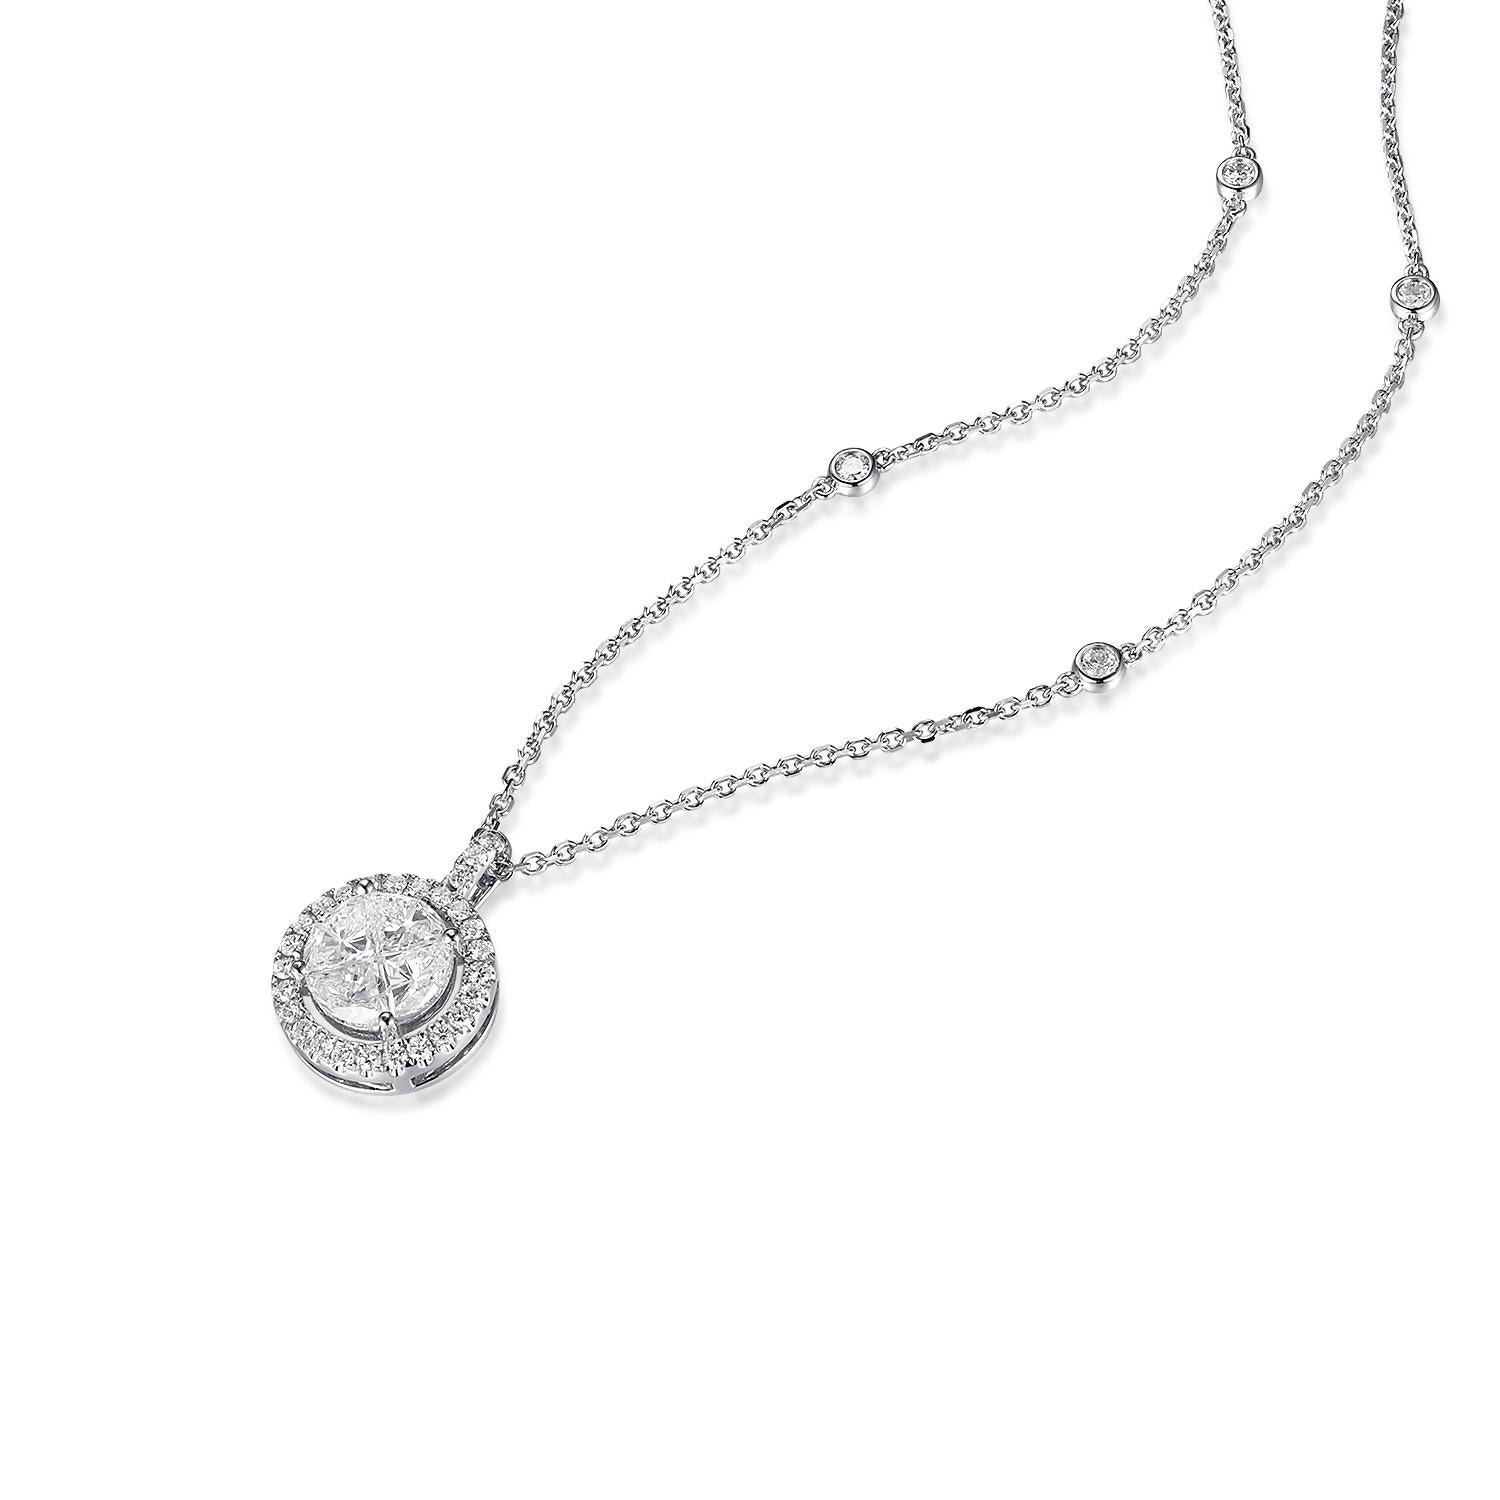 Introducing our stunning necklace that is sure to captivate anyone's attention. The centerpiece of this necklace features 4 pie cut diamonds that come together to form a round diamond, creating a beautiful and unique design. Each diamond is set in a